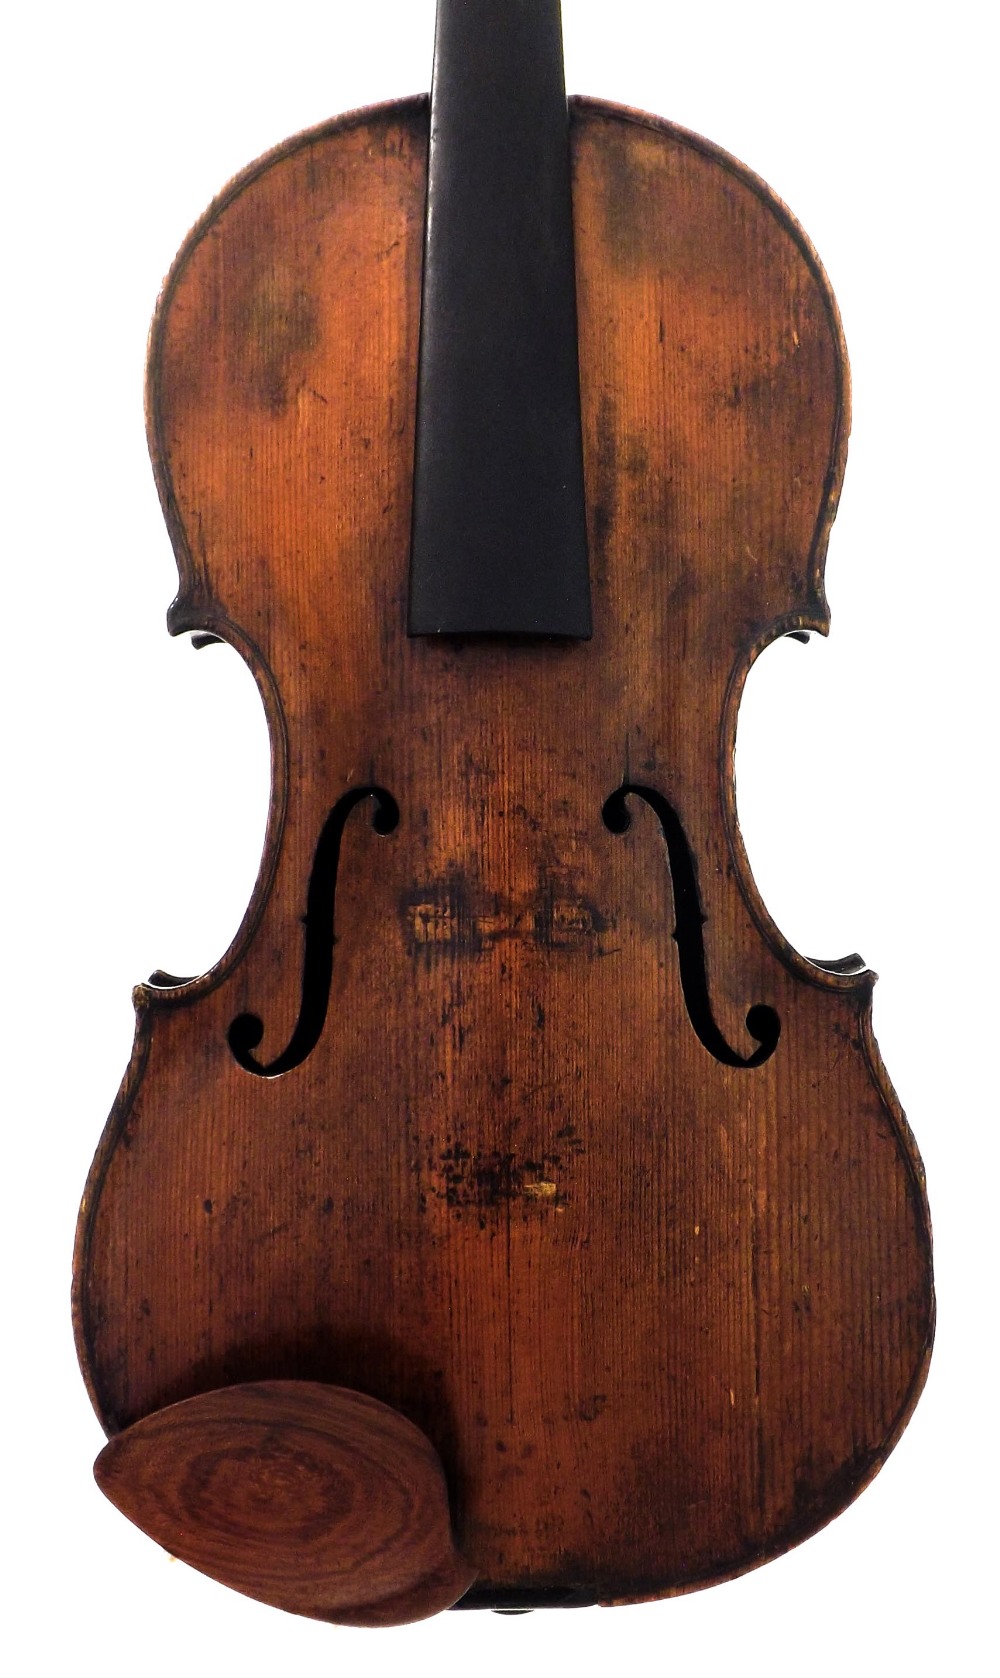 English violin attributed to John Barrett and branded Barret below the button, unlabelled, the one